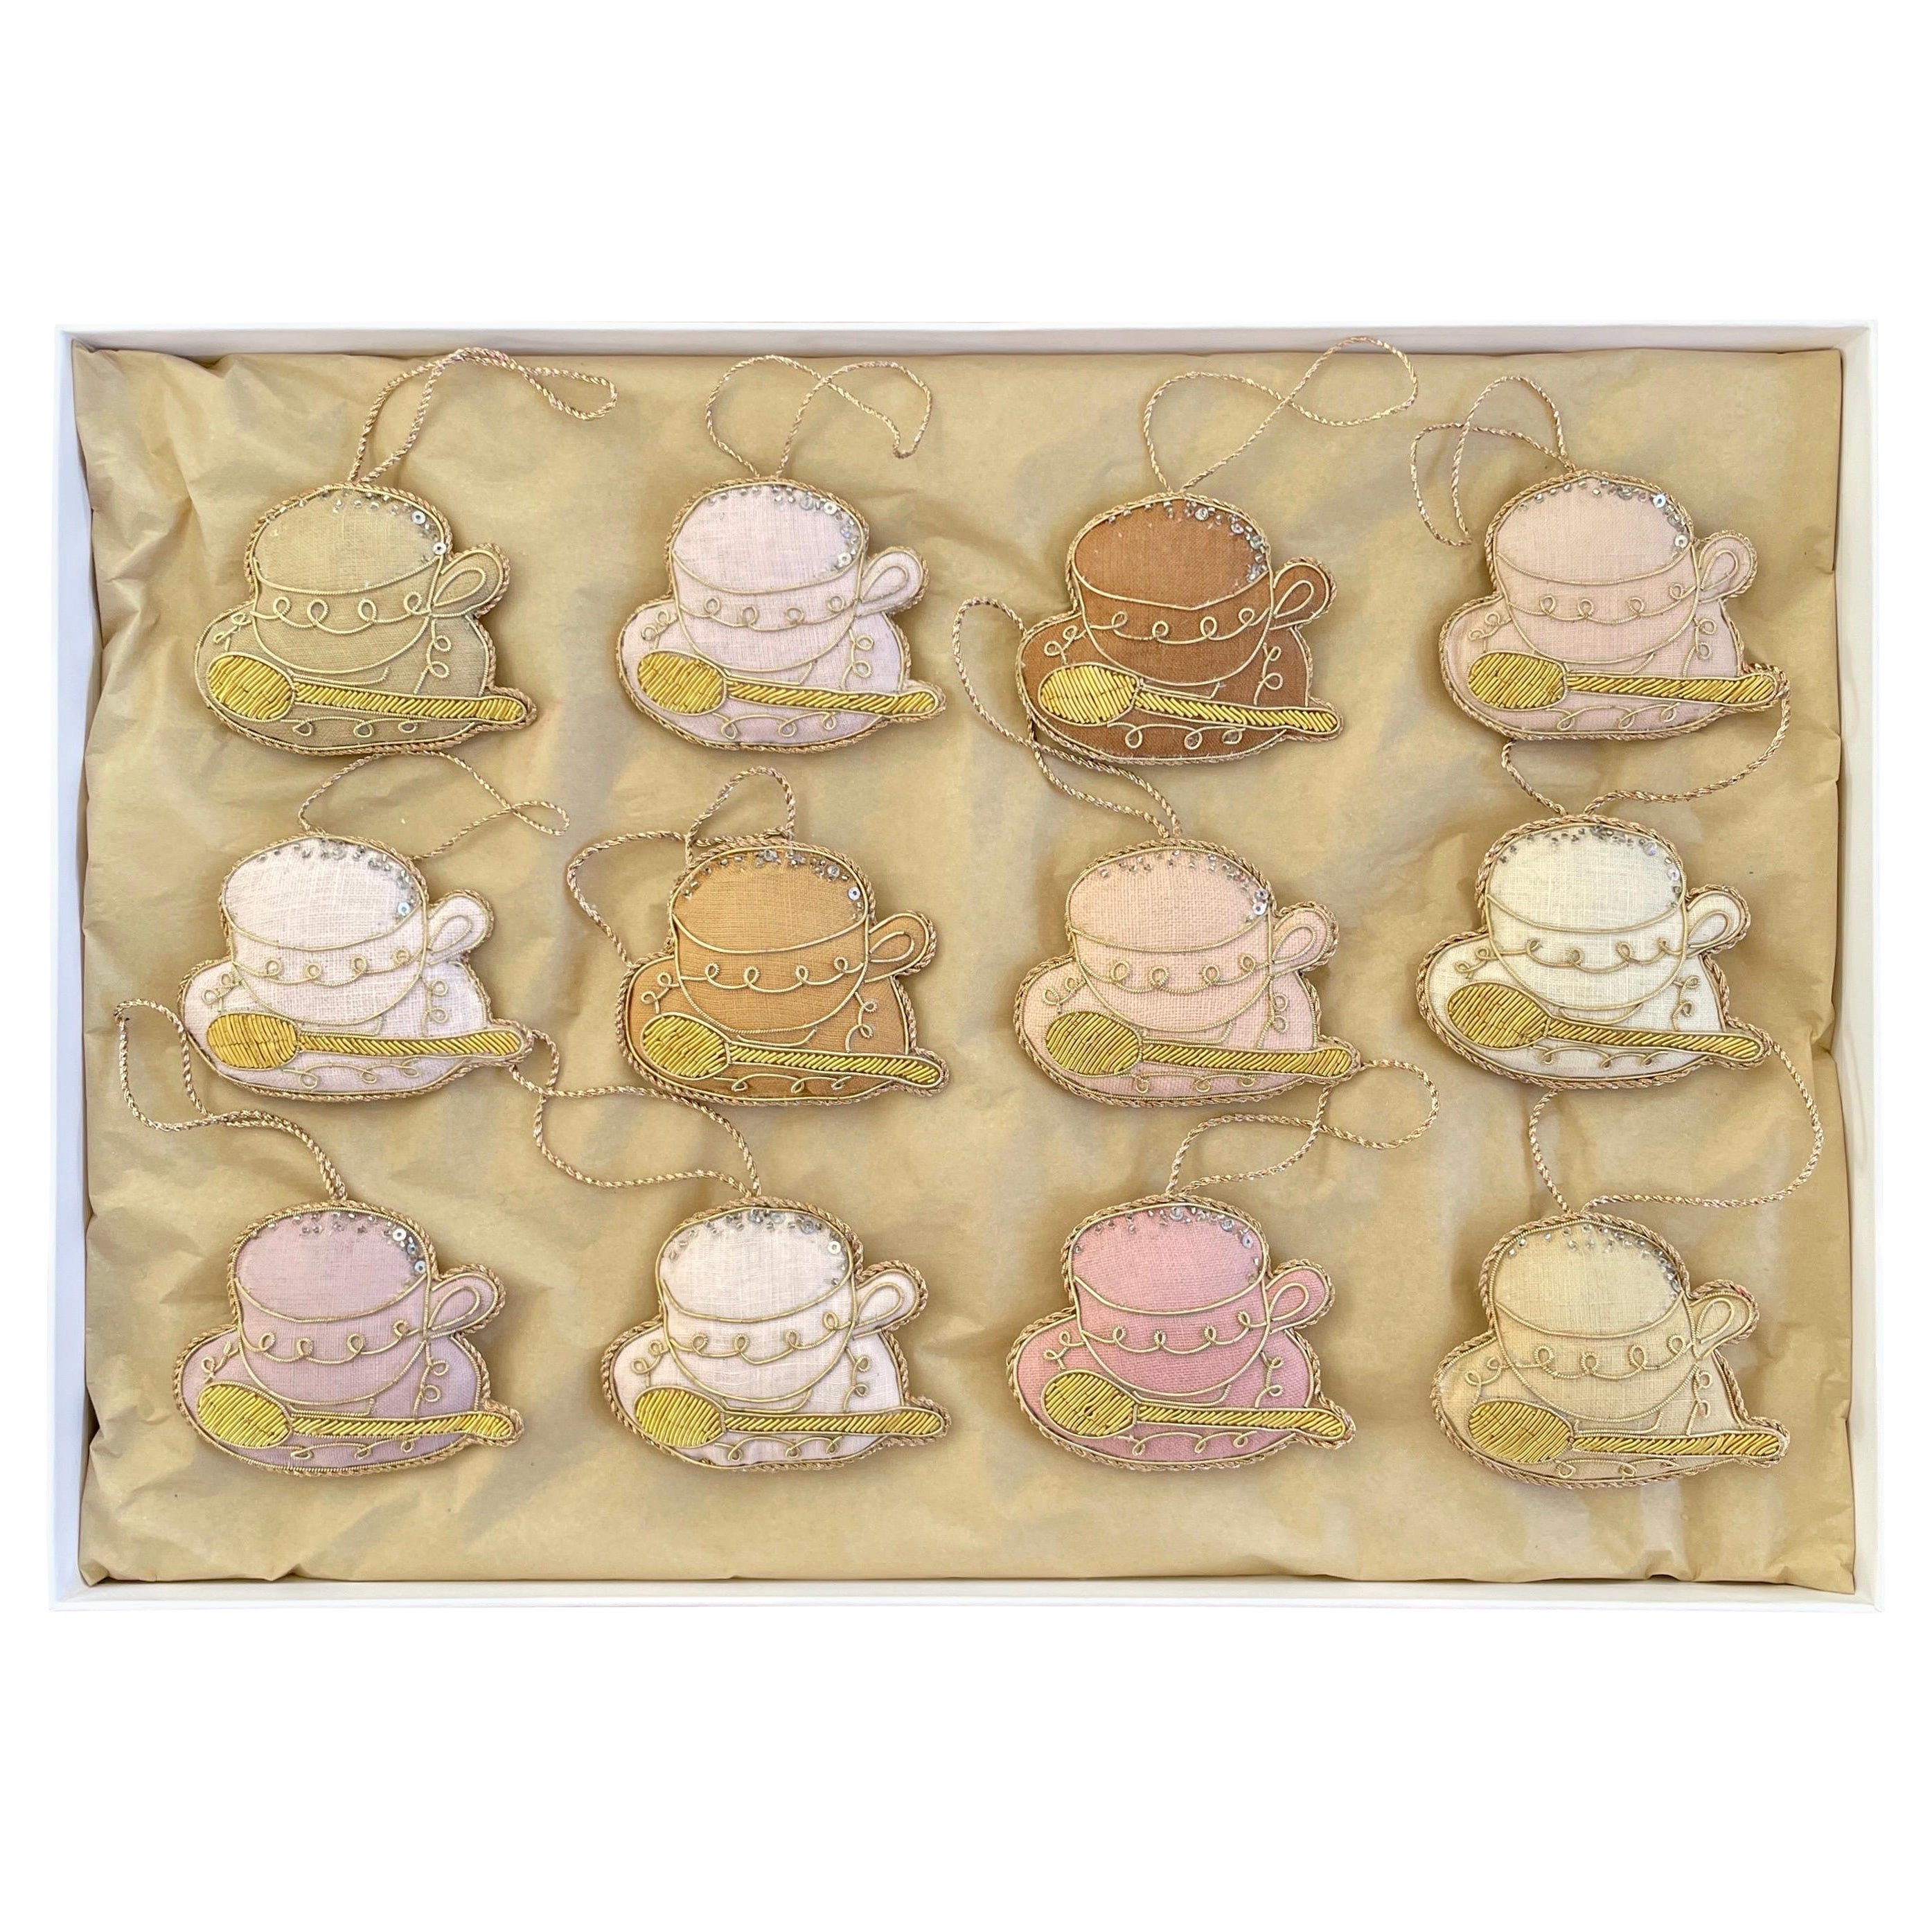 Set of 12 limited Edition Artisan Irish Linen teacup ornaments in pastels by Katie Larmour 

This is a luxury box set of artisan made decorative ornaments created with authentic Irish Linen, exclusive to 1stdibs. They are special because they are